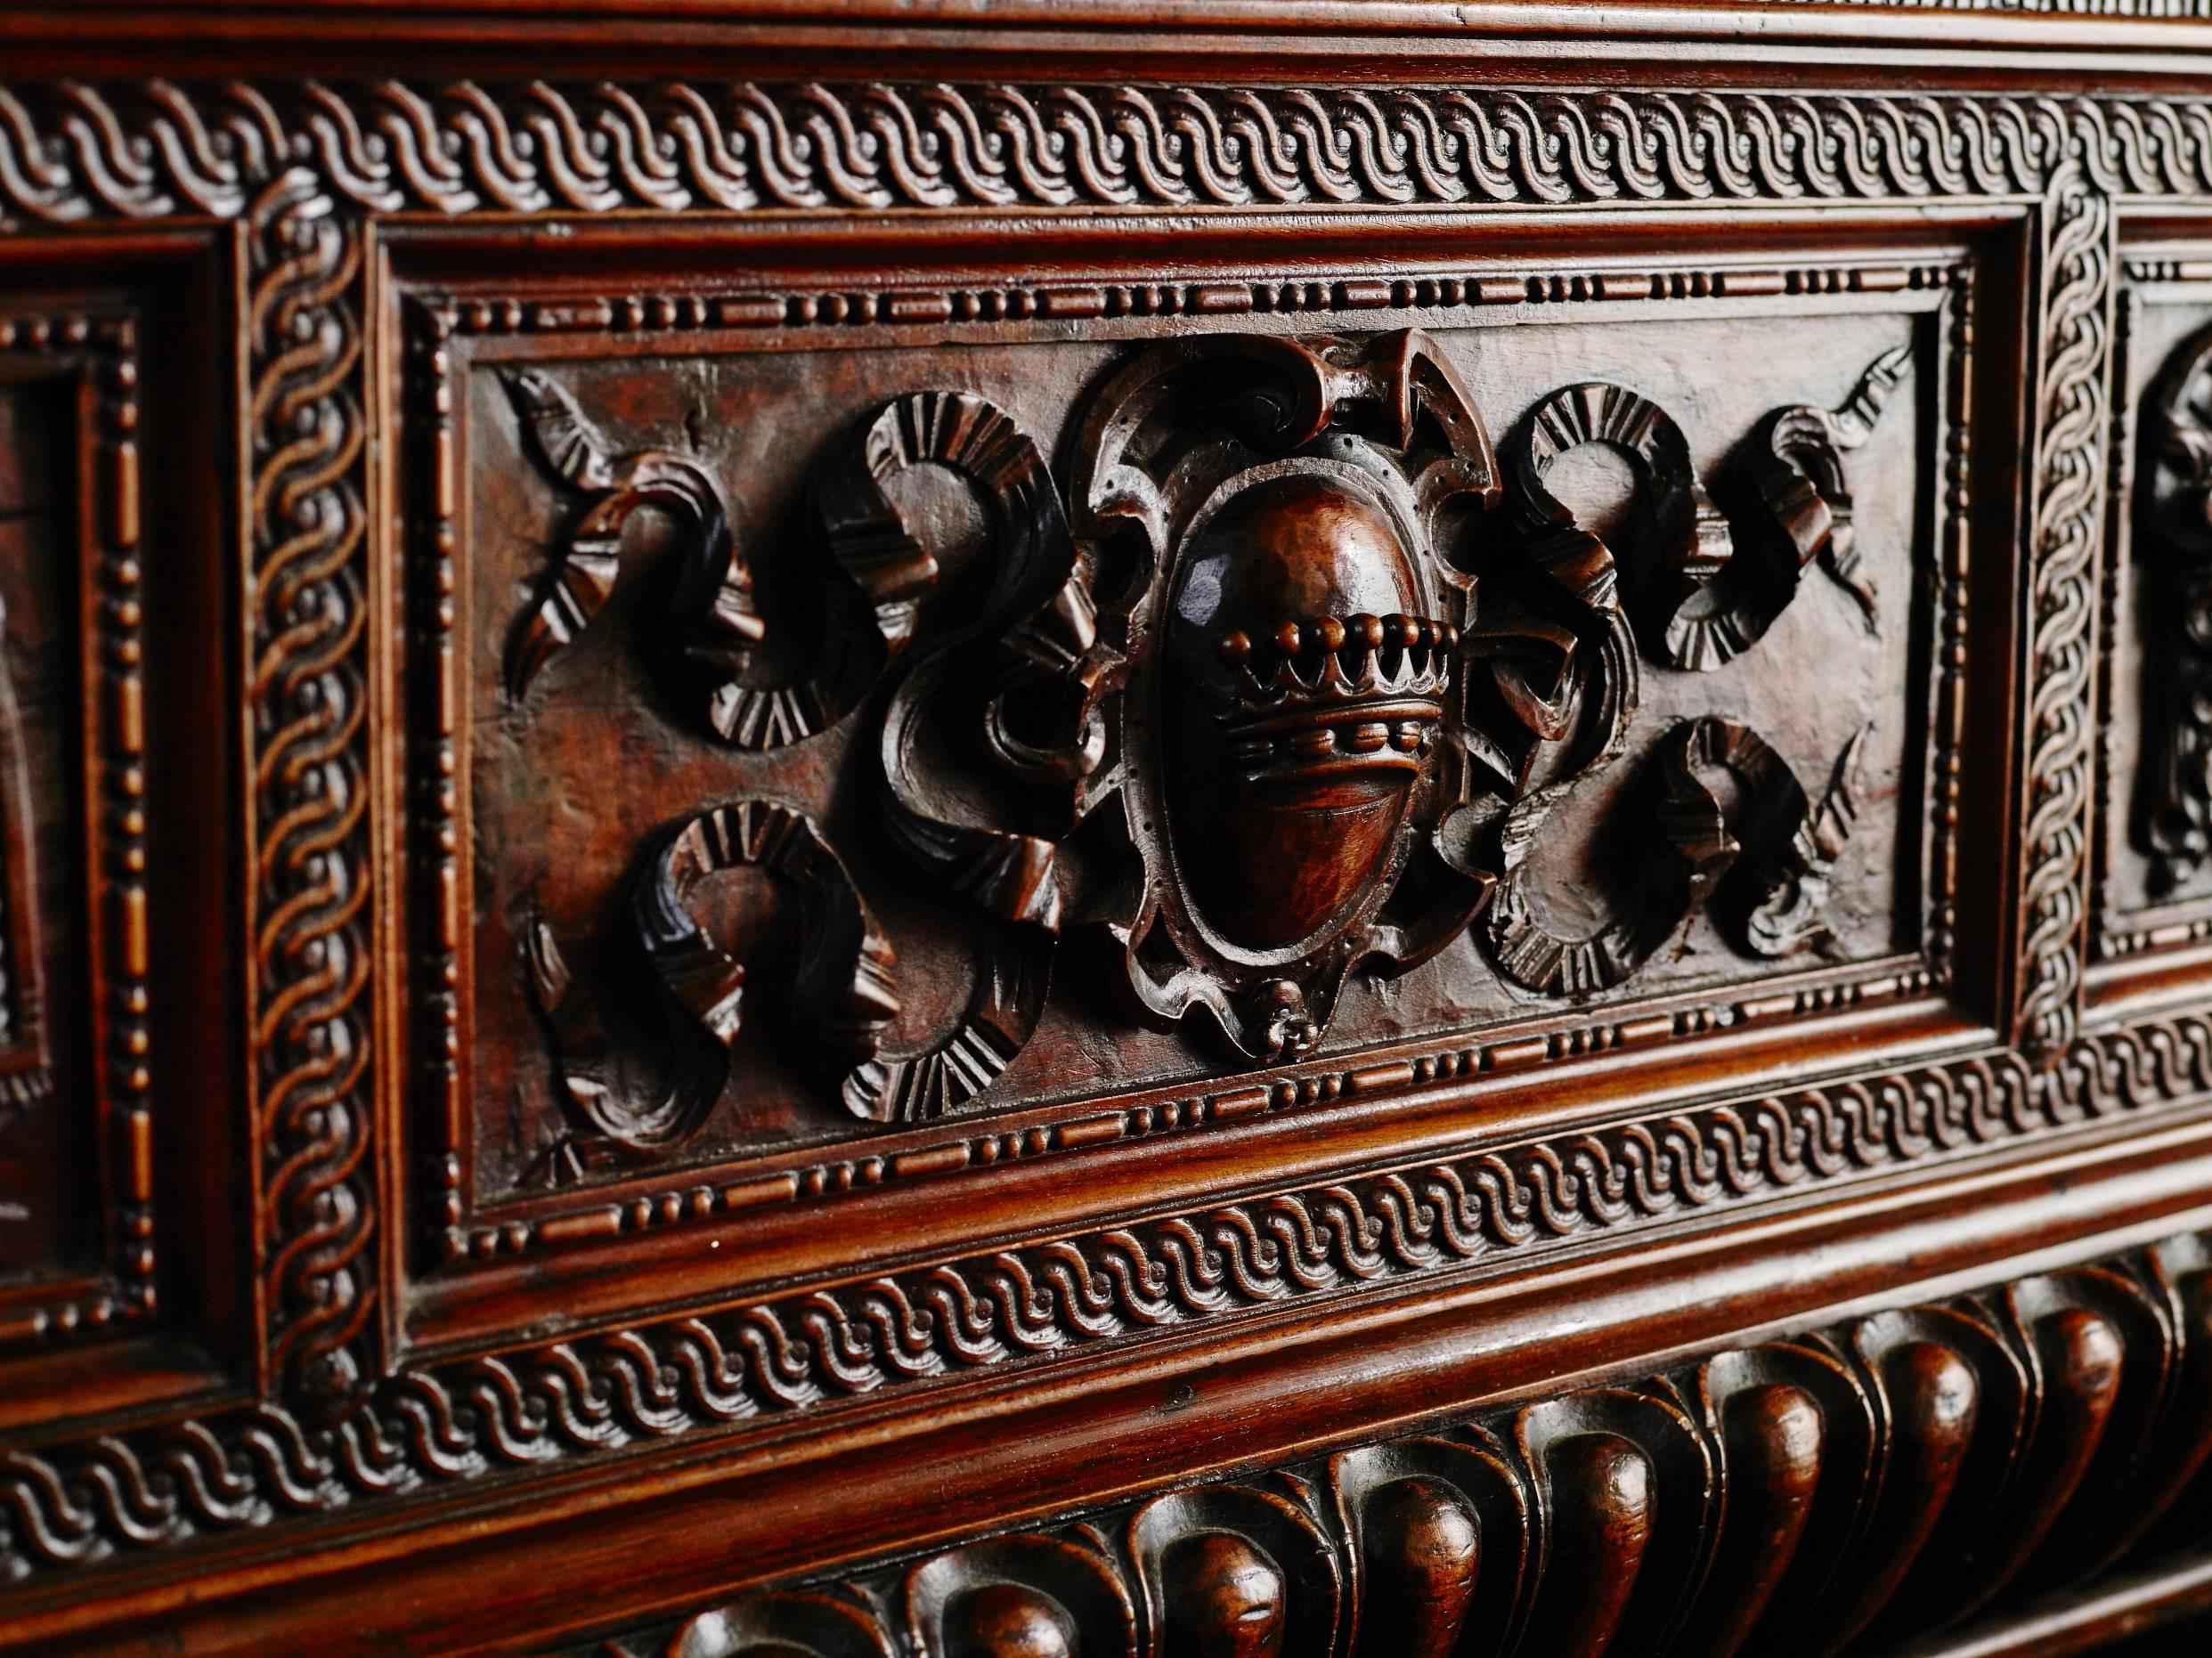 A very good quality 16th century Tuscan walnut marriage cassone. Firenze, circa 1580.

This fine example of an Italian Renaissance cassone is constructed from a poplar carcass applied with carved walnut panels and mouldings in an overall antique